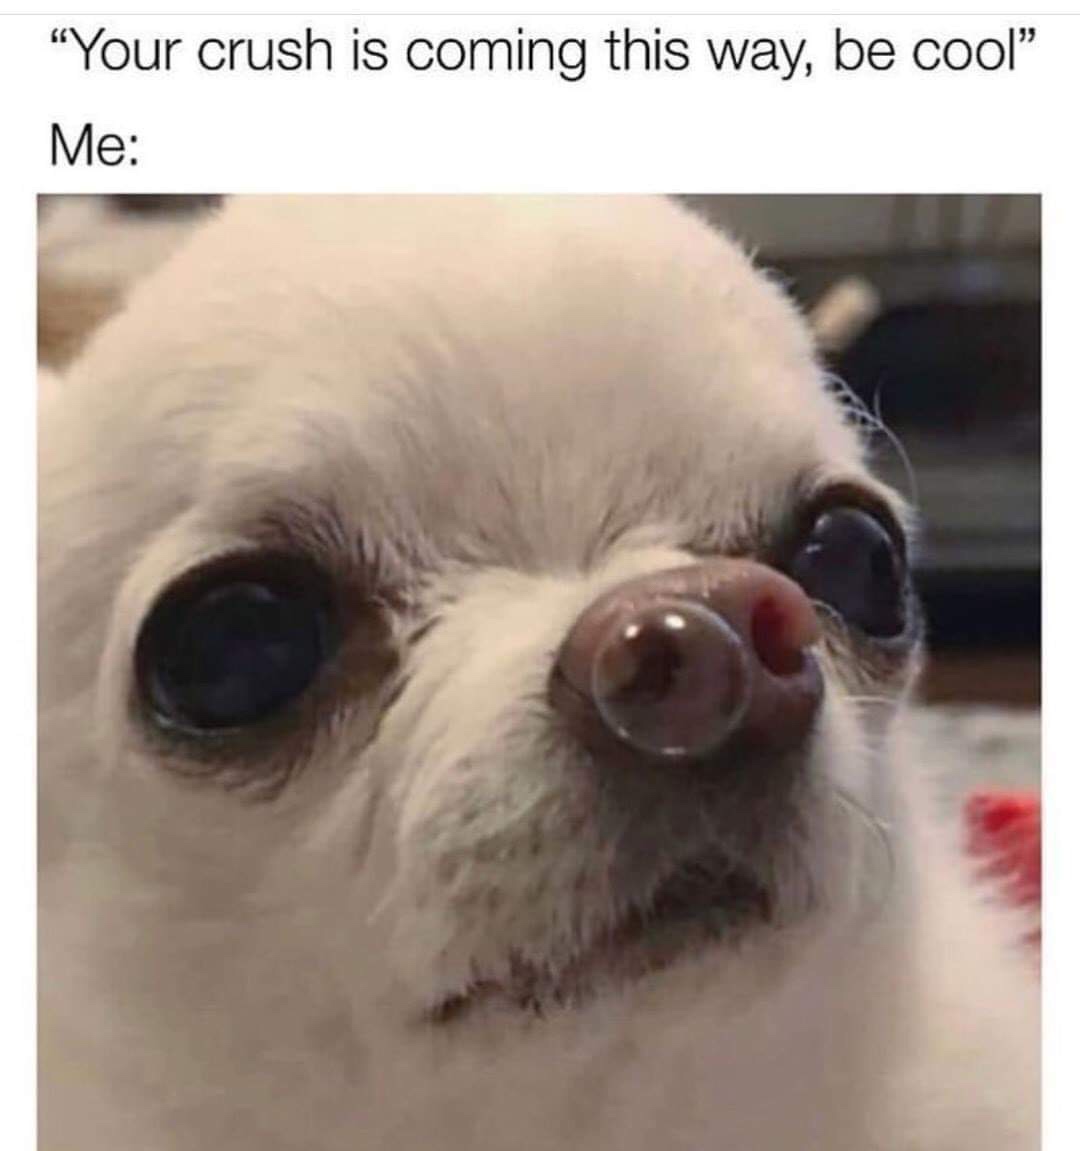 your crush is coming this way be cool - "Your crush is coming this way, be cool Me